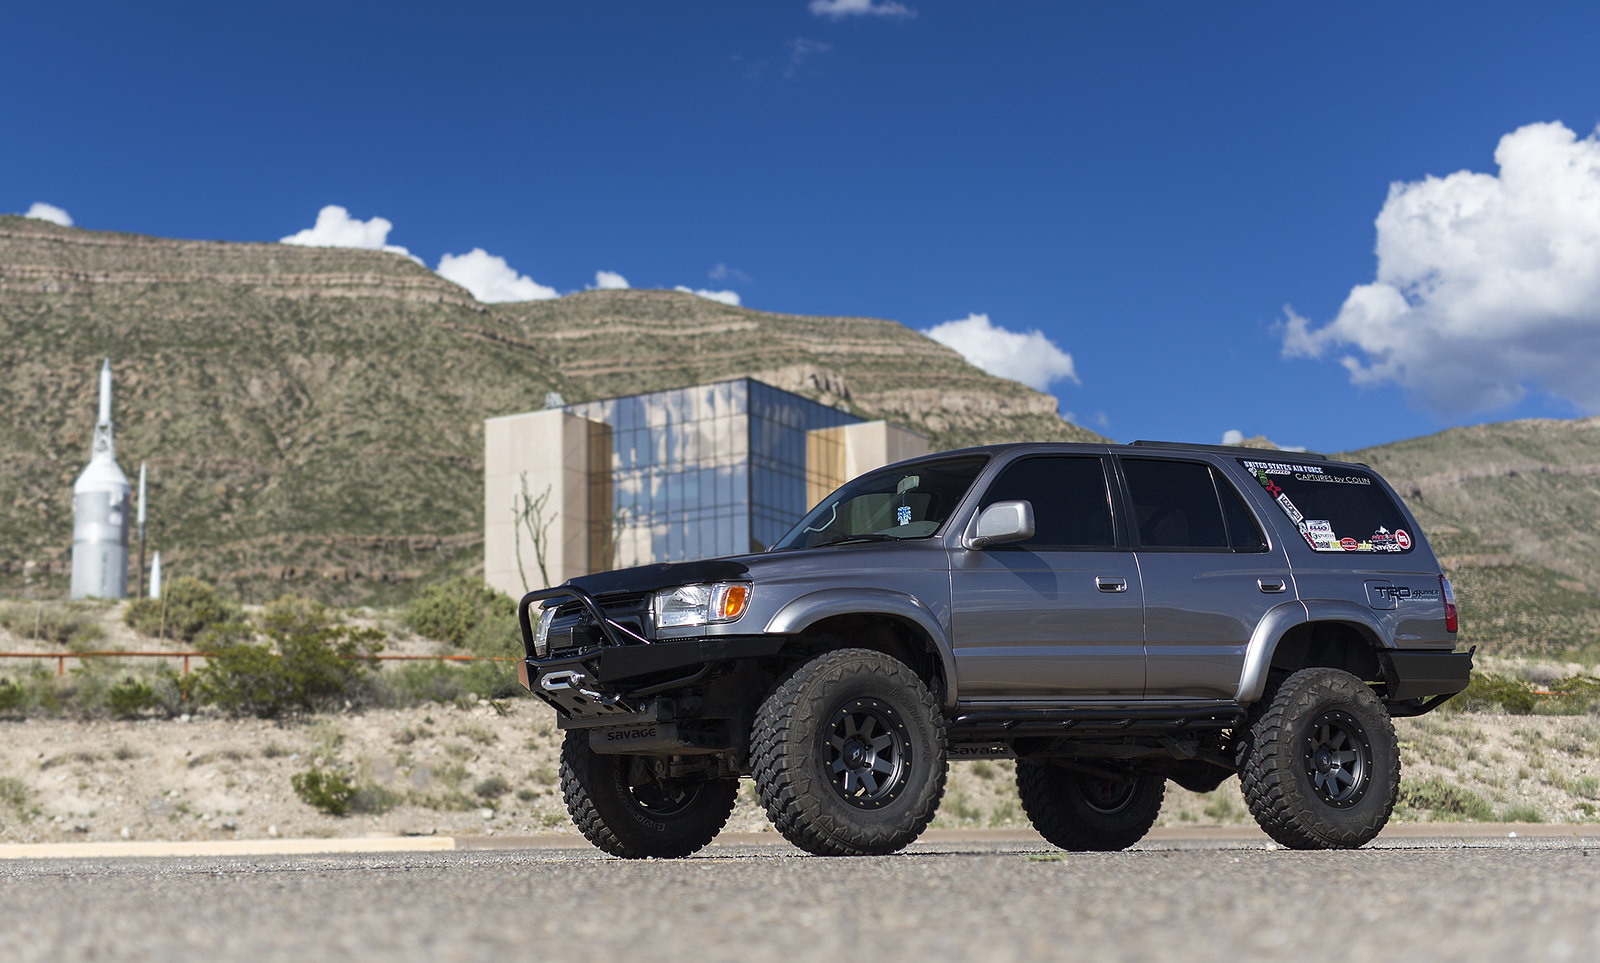 This is a rad shot and a beautiful 4 Runner! 